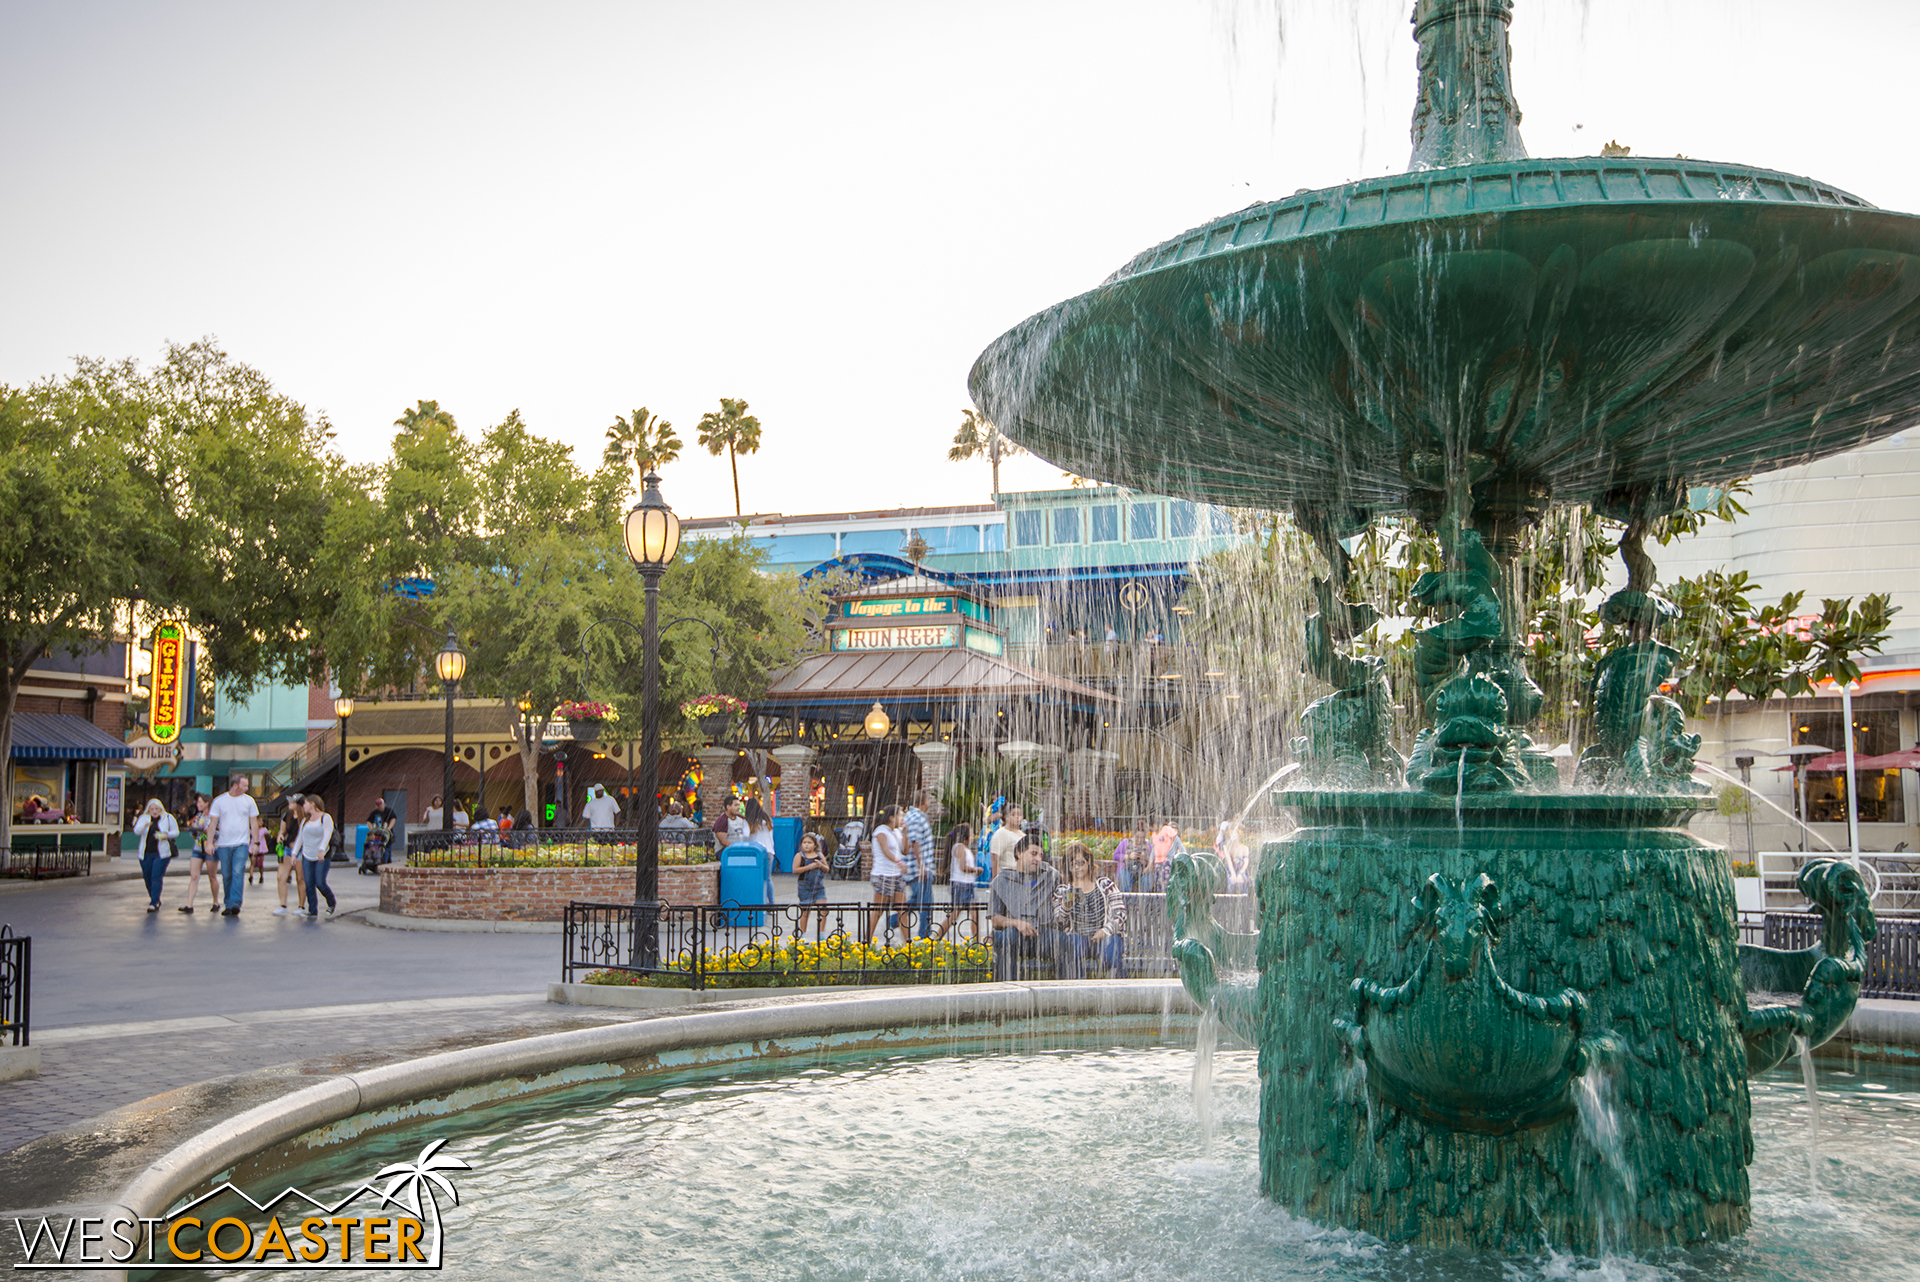  Charleston Fountain is a reminder of what The Boardwalk was like before its re-theme, so many years ago. 